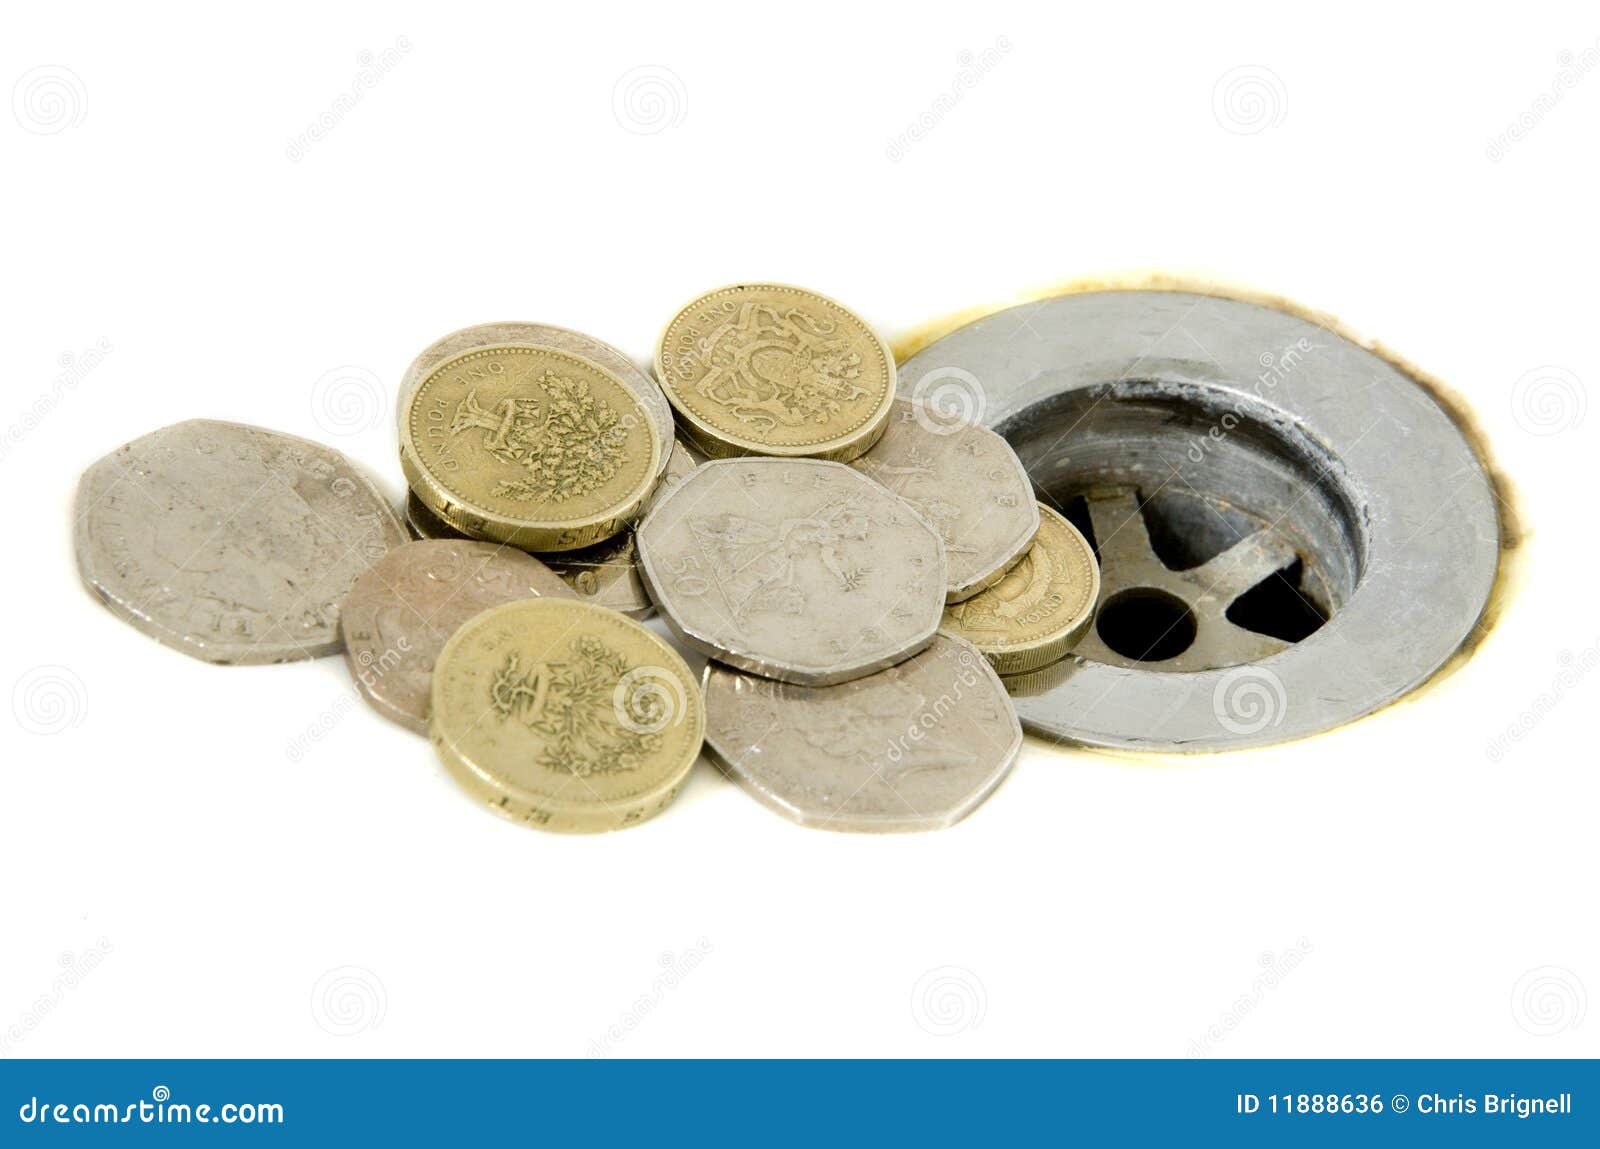 clipart of money going down the drain - photo #18